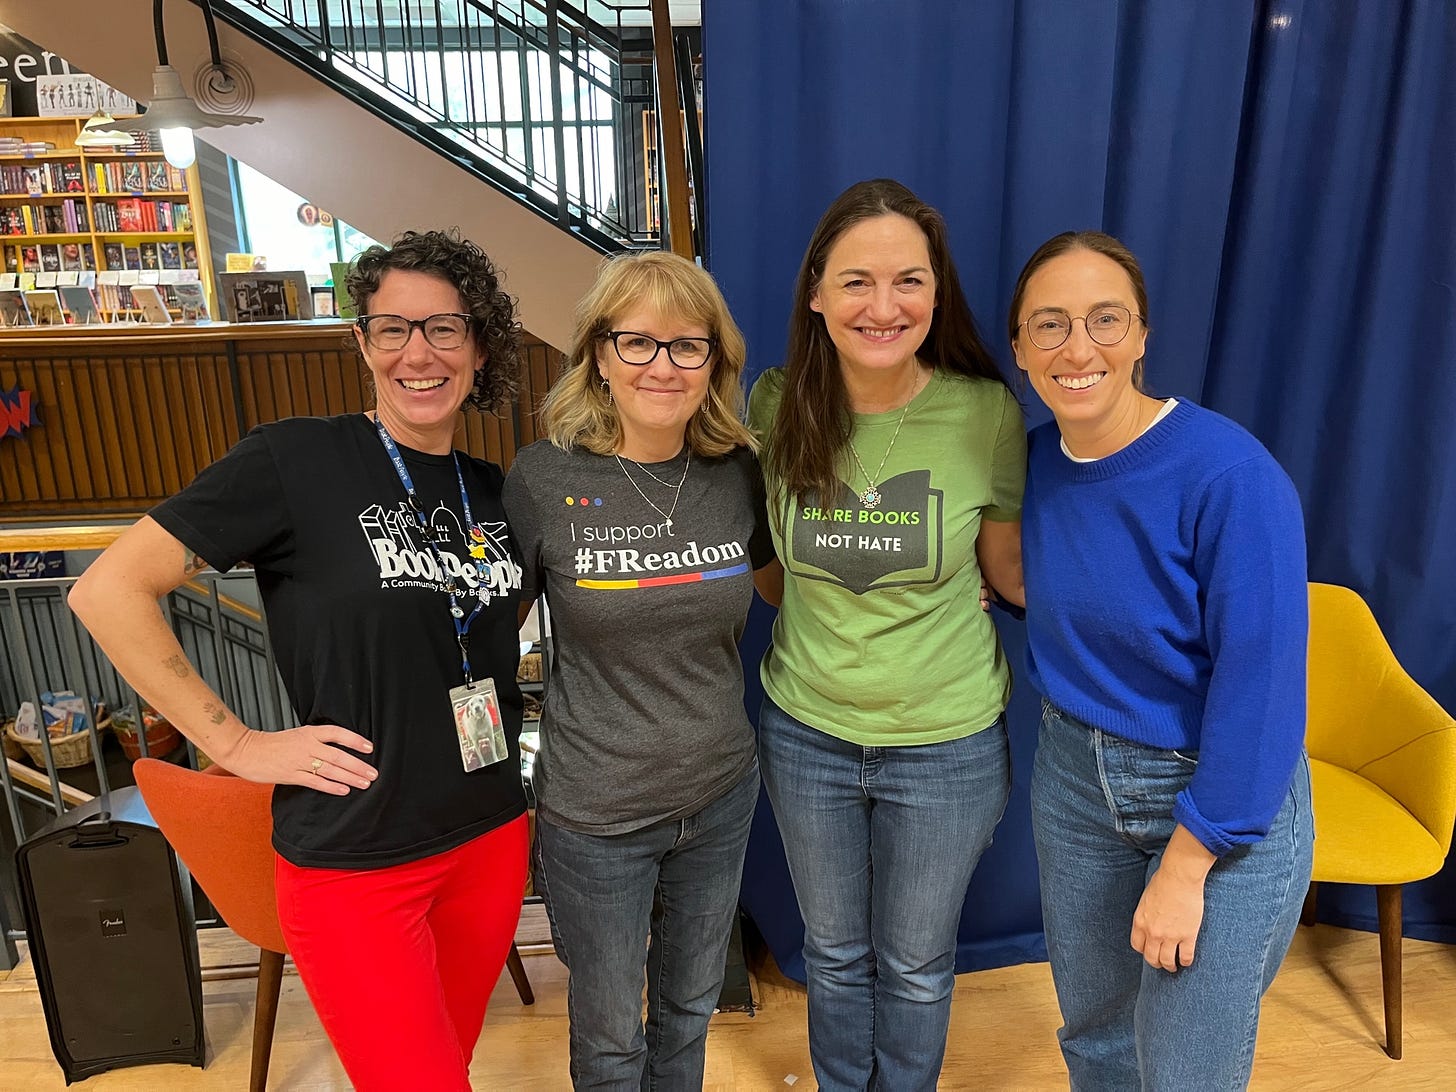 Charley Rejsek of BookPeople, Carolyn Foote of FReadom Fighters, author Samantha M Clark and Kasey Meehan of PEN America after the Magical Power of Reading panel at BookPeople Oct. 7, 2023